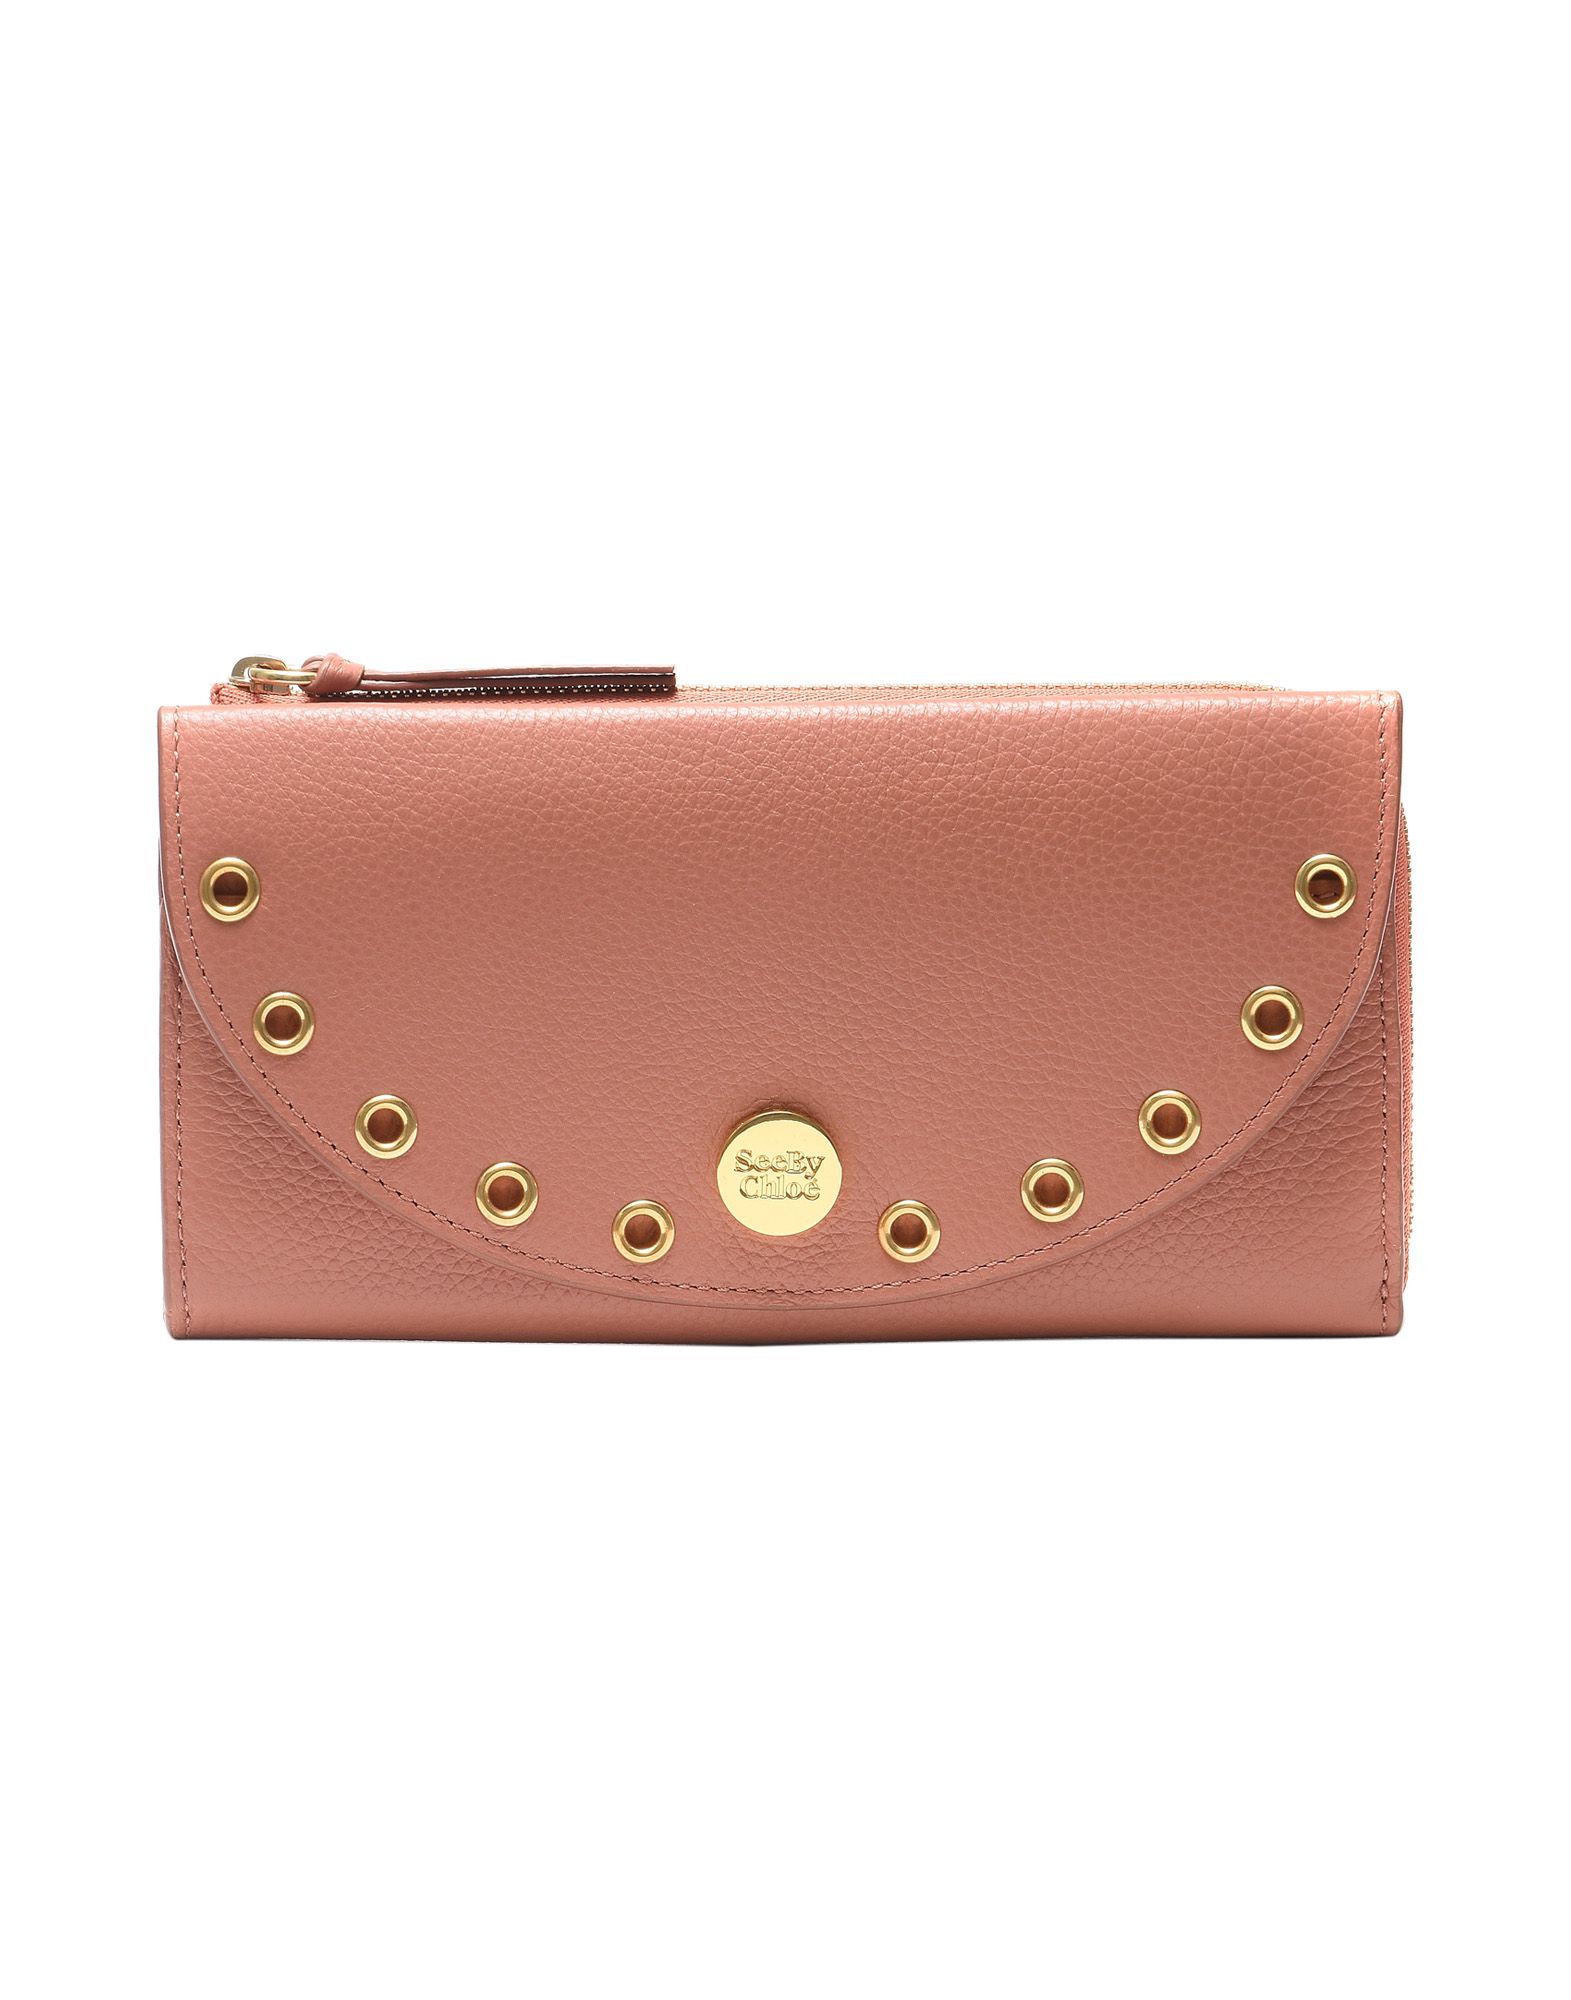 SEE BY CHLOÉ WALLET,46594120GB 1